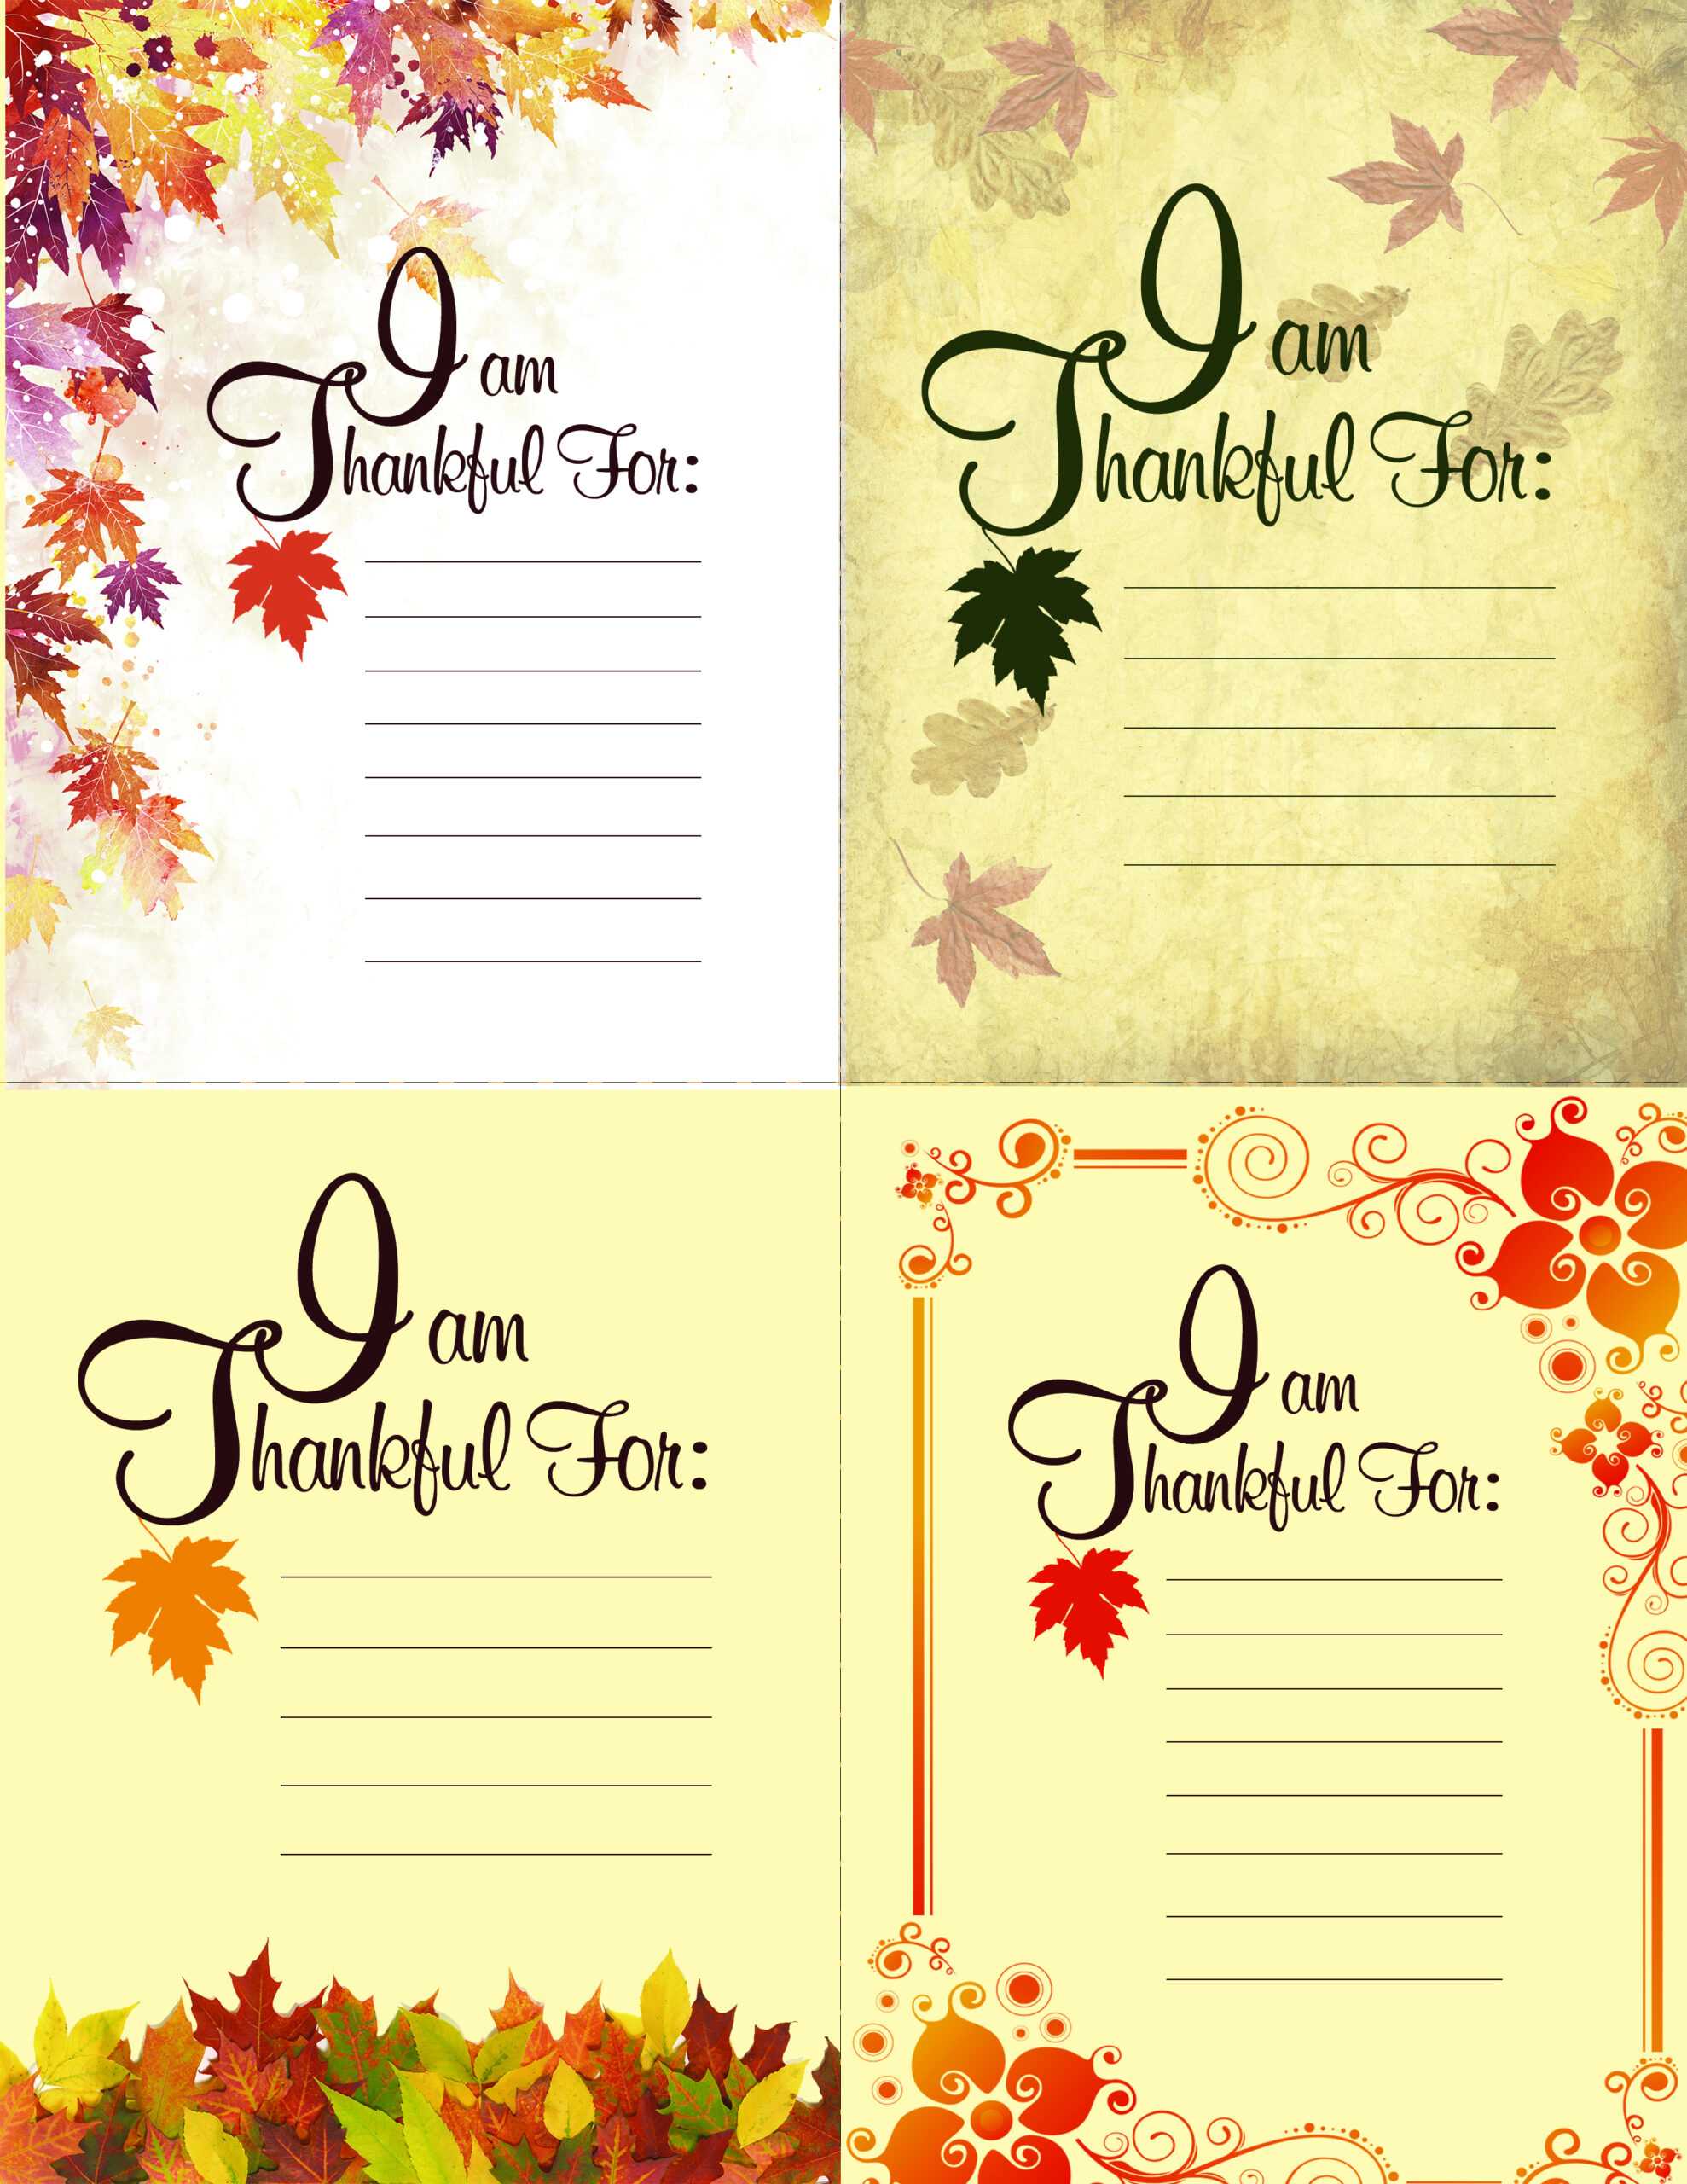 Printable Thanksgiving Place Setting Cards | Blue Mountain Throughout Thanksgiving Place Cards Template